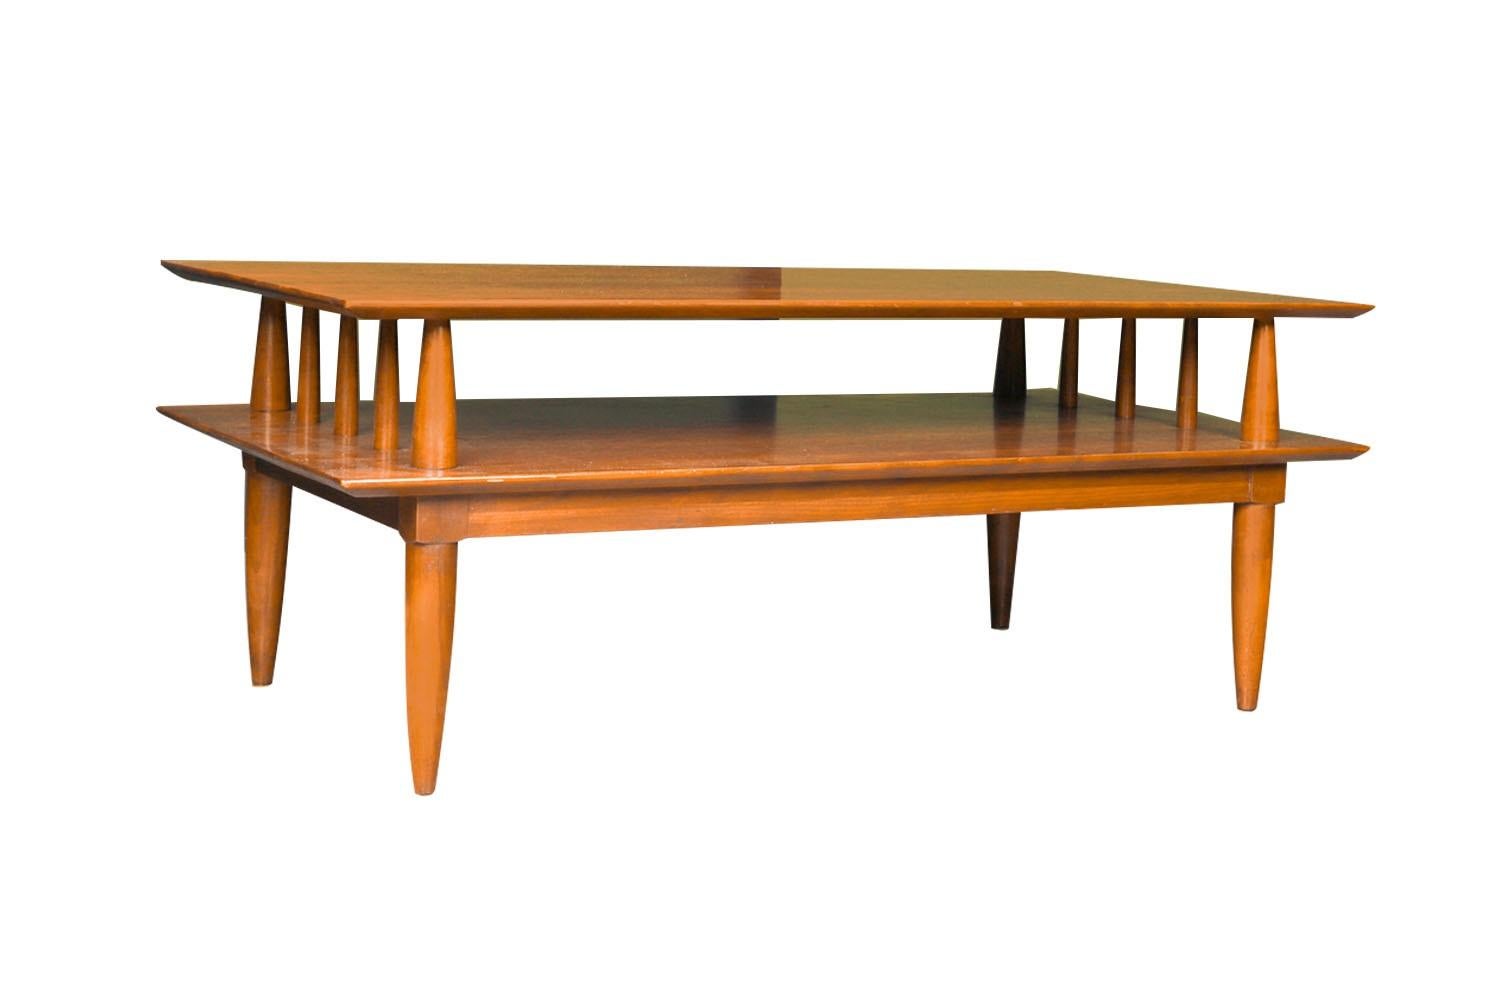 Striking architectural Mid-Century Modern two tier solid cherry coffee table by Willett furniture, circa 1960s. Solid cherry spindle support with a knife-edge top surface, the bottom shelf offers a spacious open storage area. The dramatic two tier